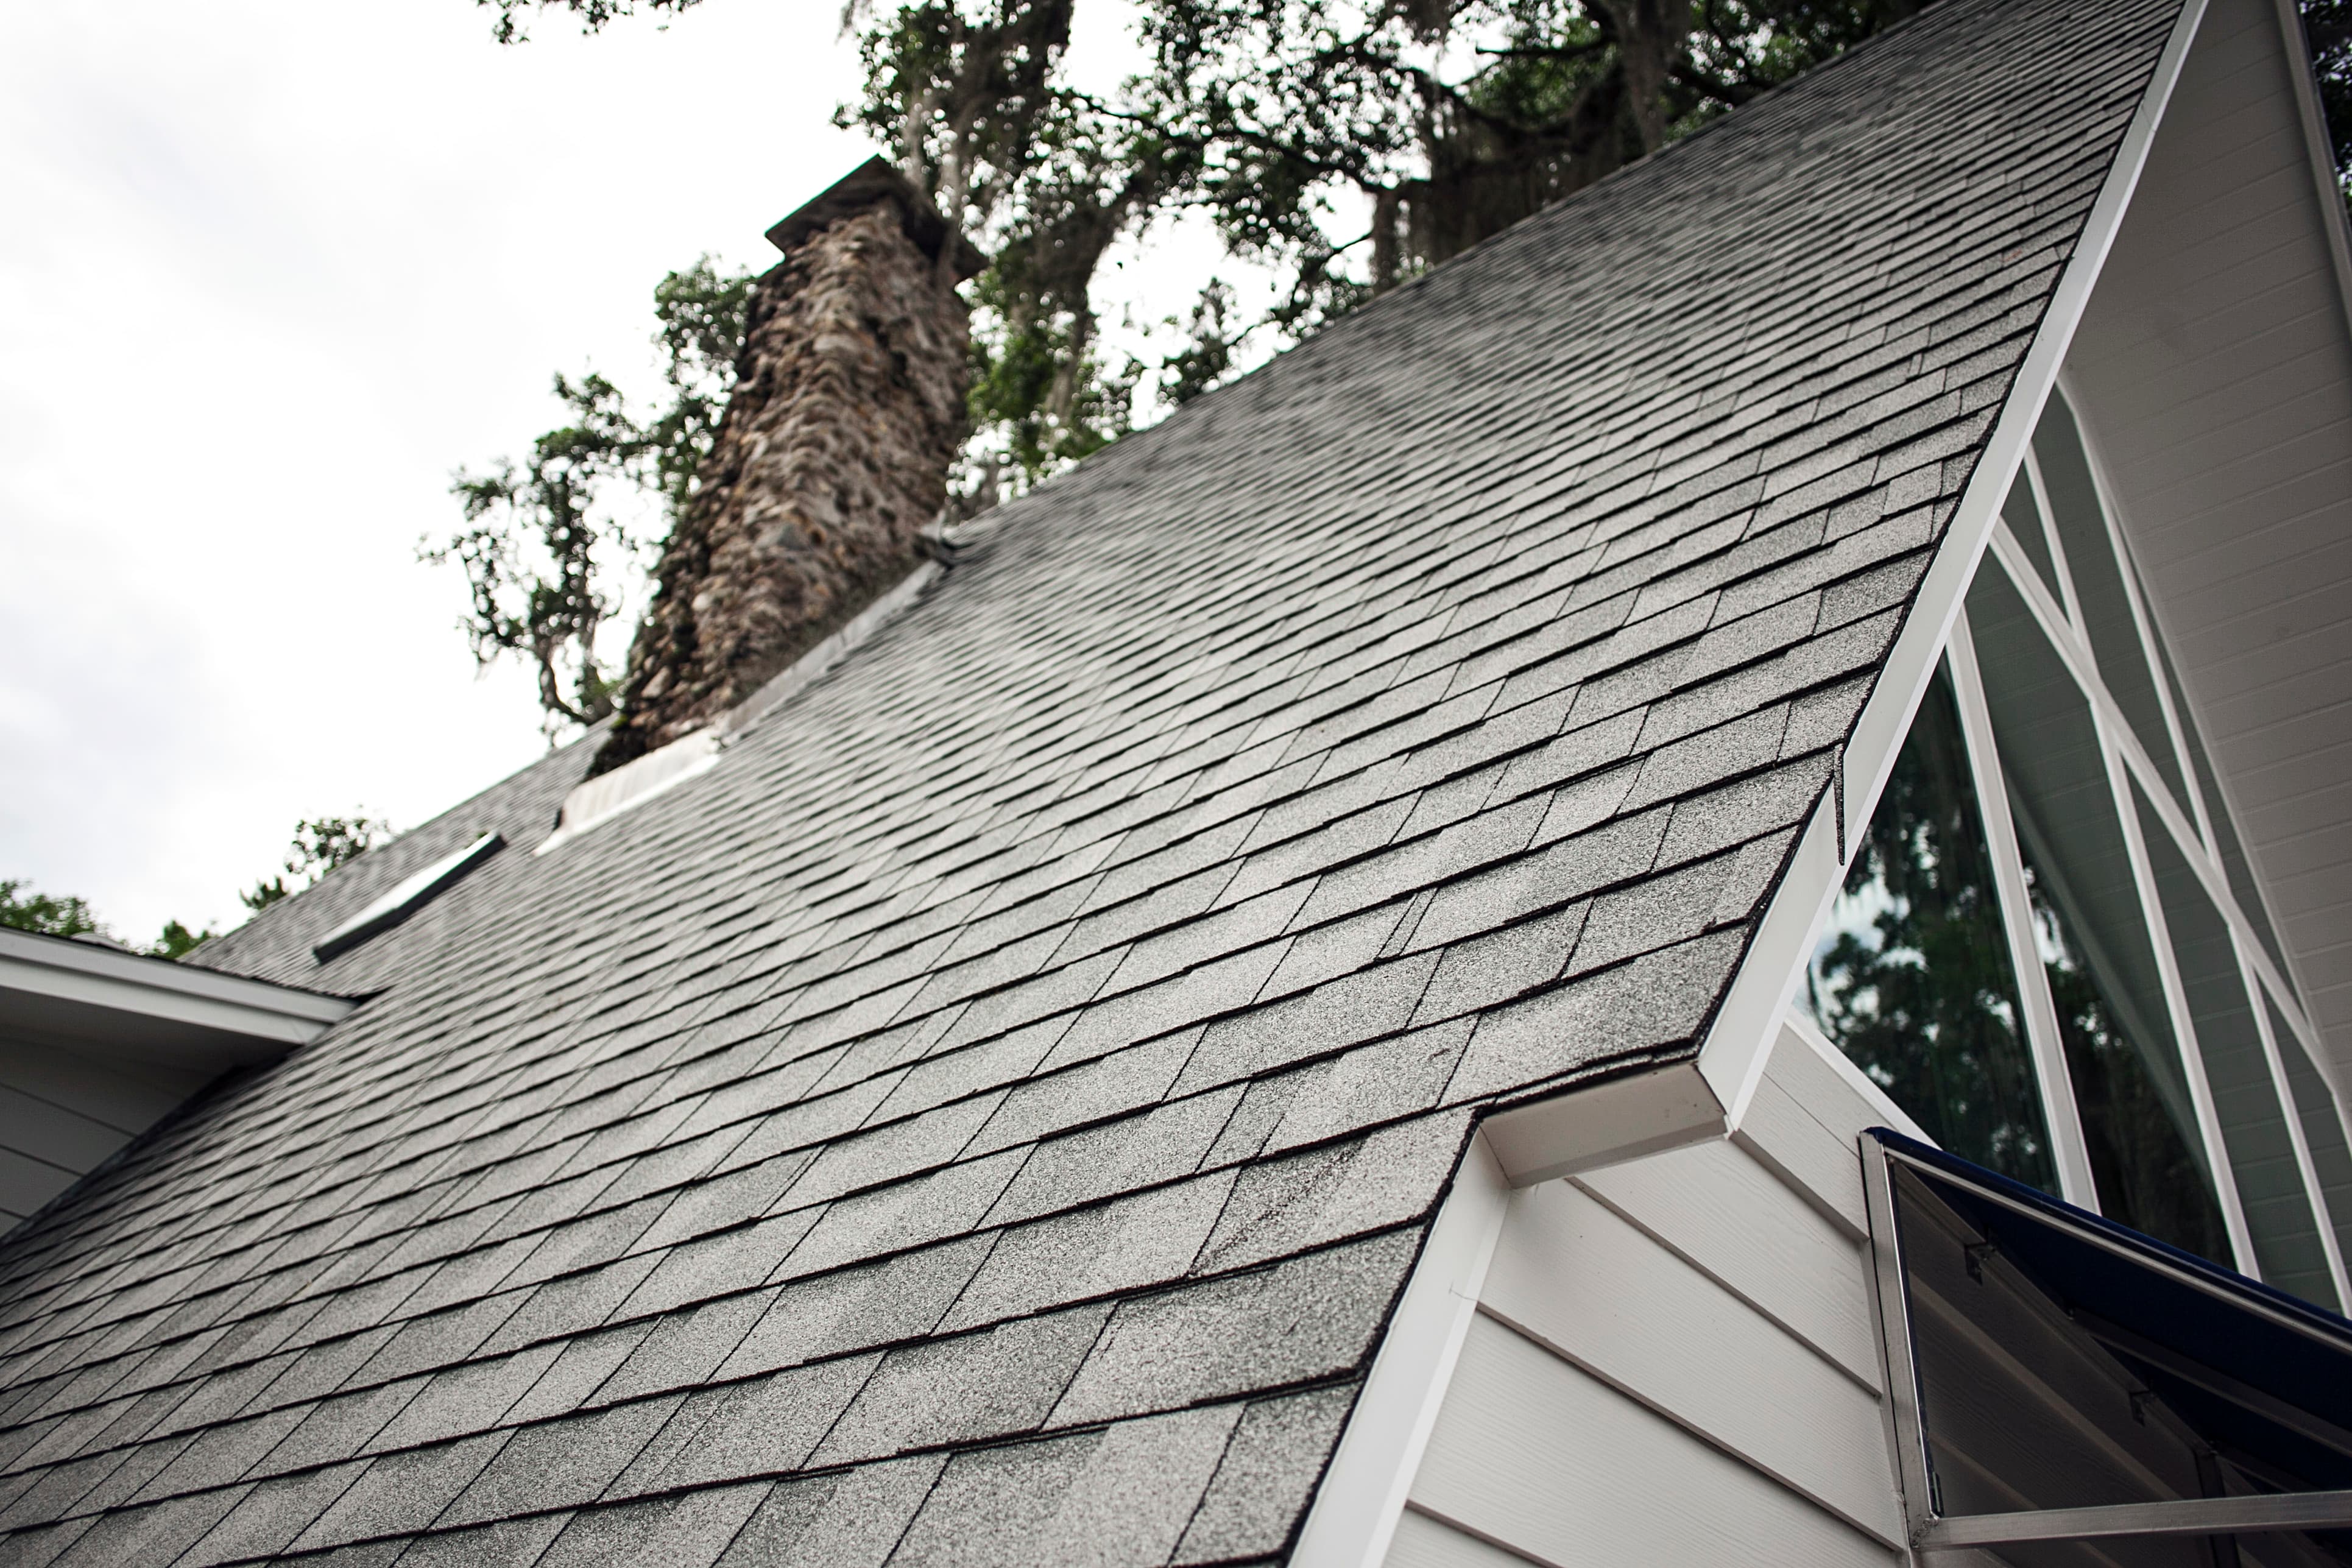 Roofing Emergencies - A picture of a sloped residential roof with asphalt shingles.